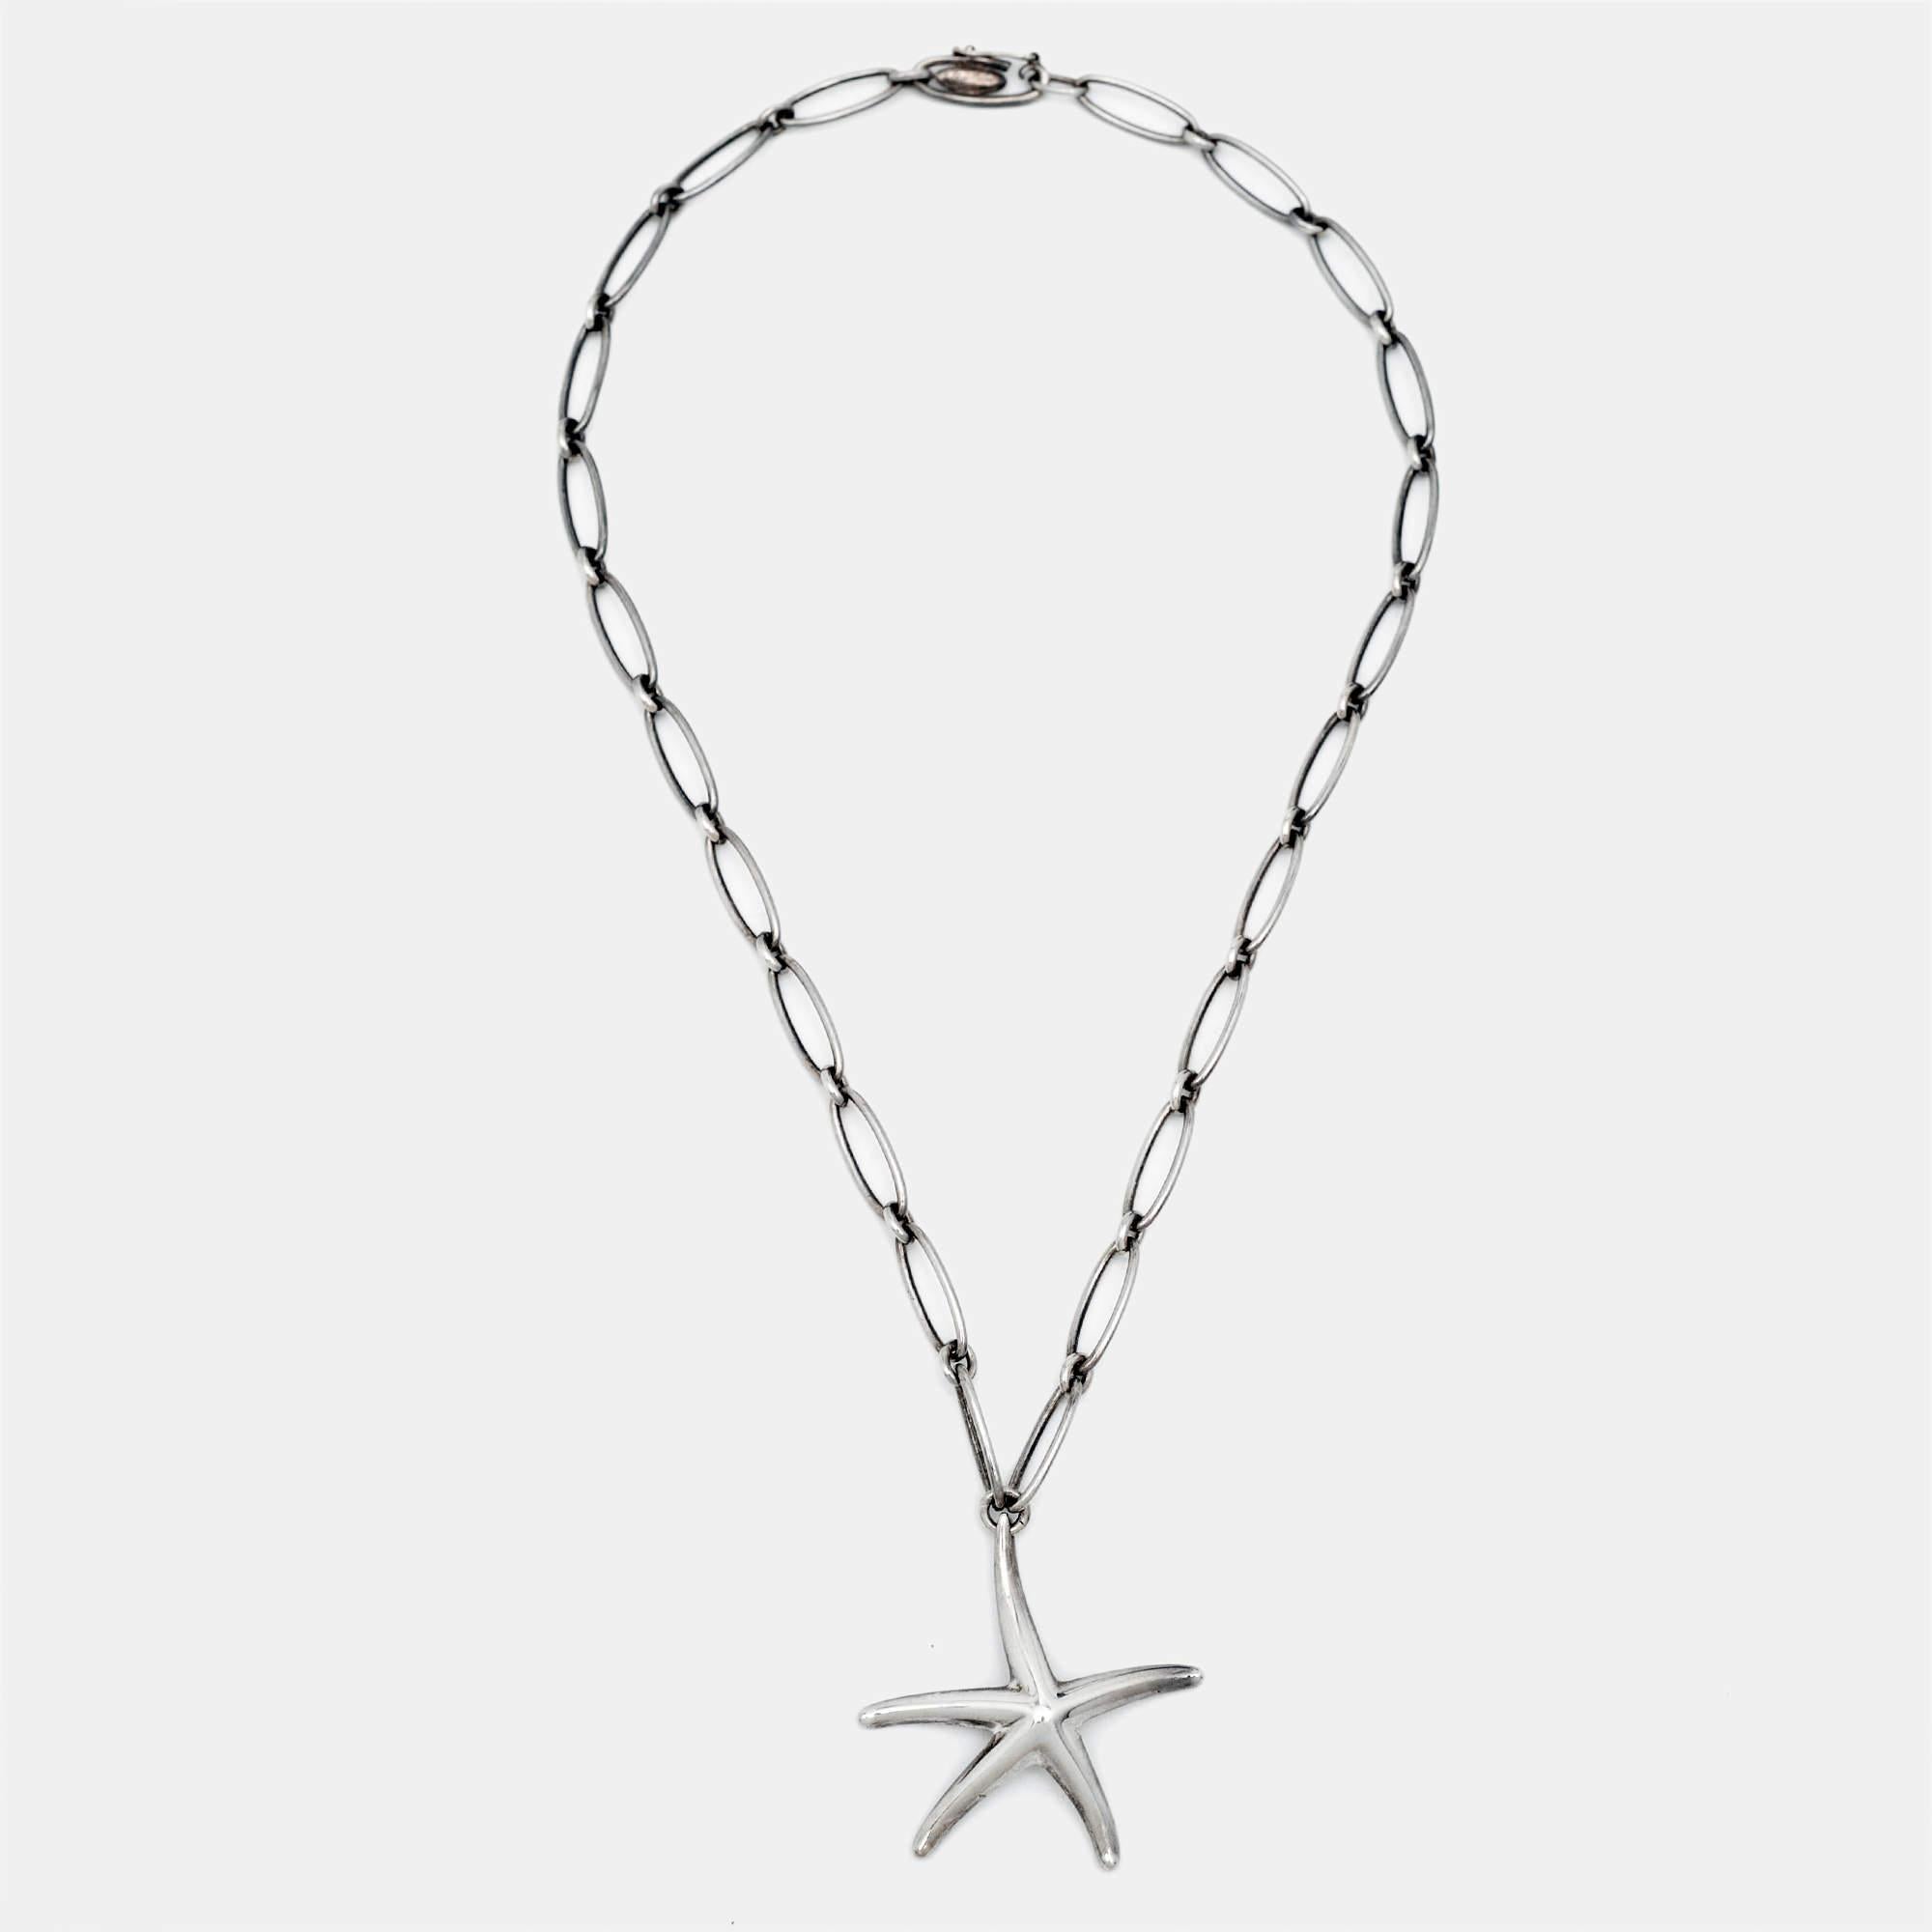 This lovely pendant necklace from Tiffany is sure to become one of your favorite accessories! It comes crafted from silver, and the chain carries a starfish pendant.

